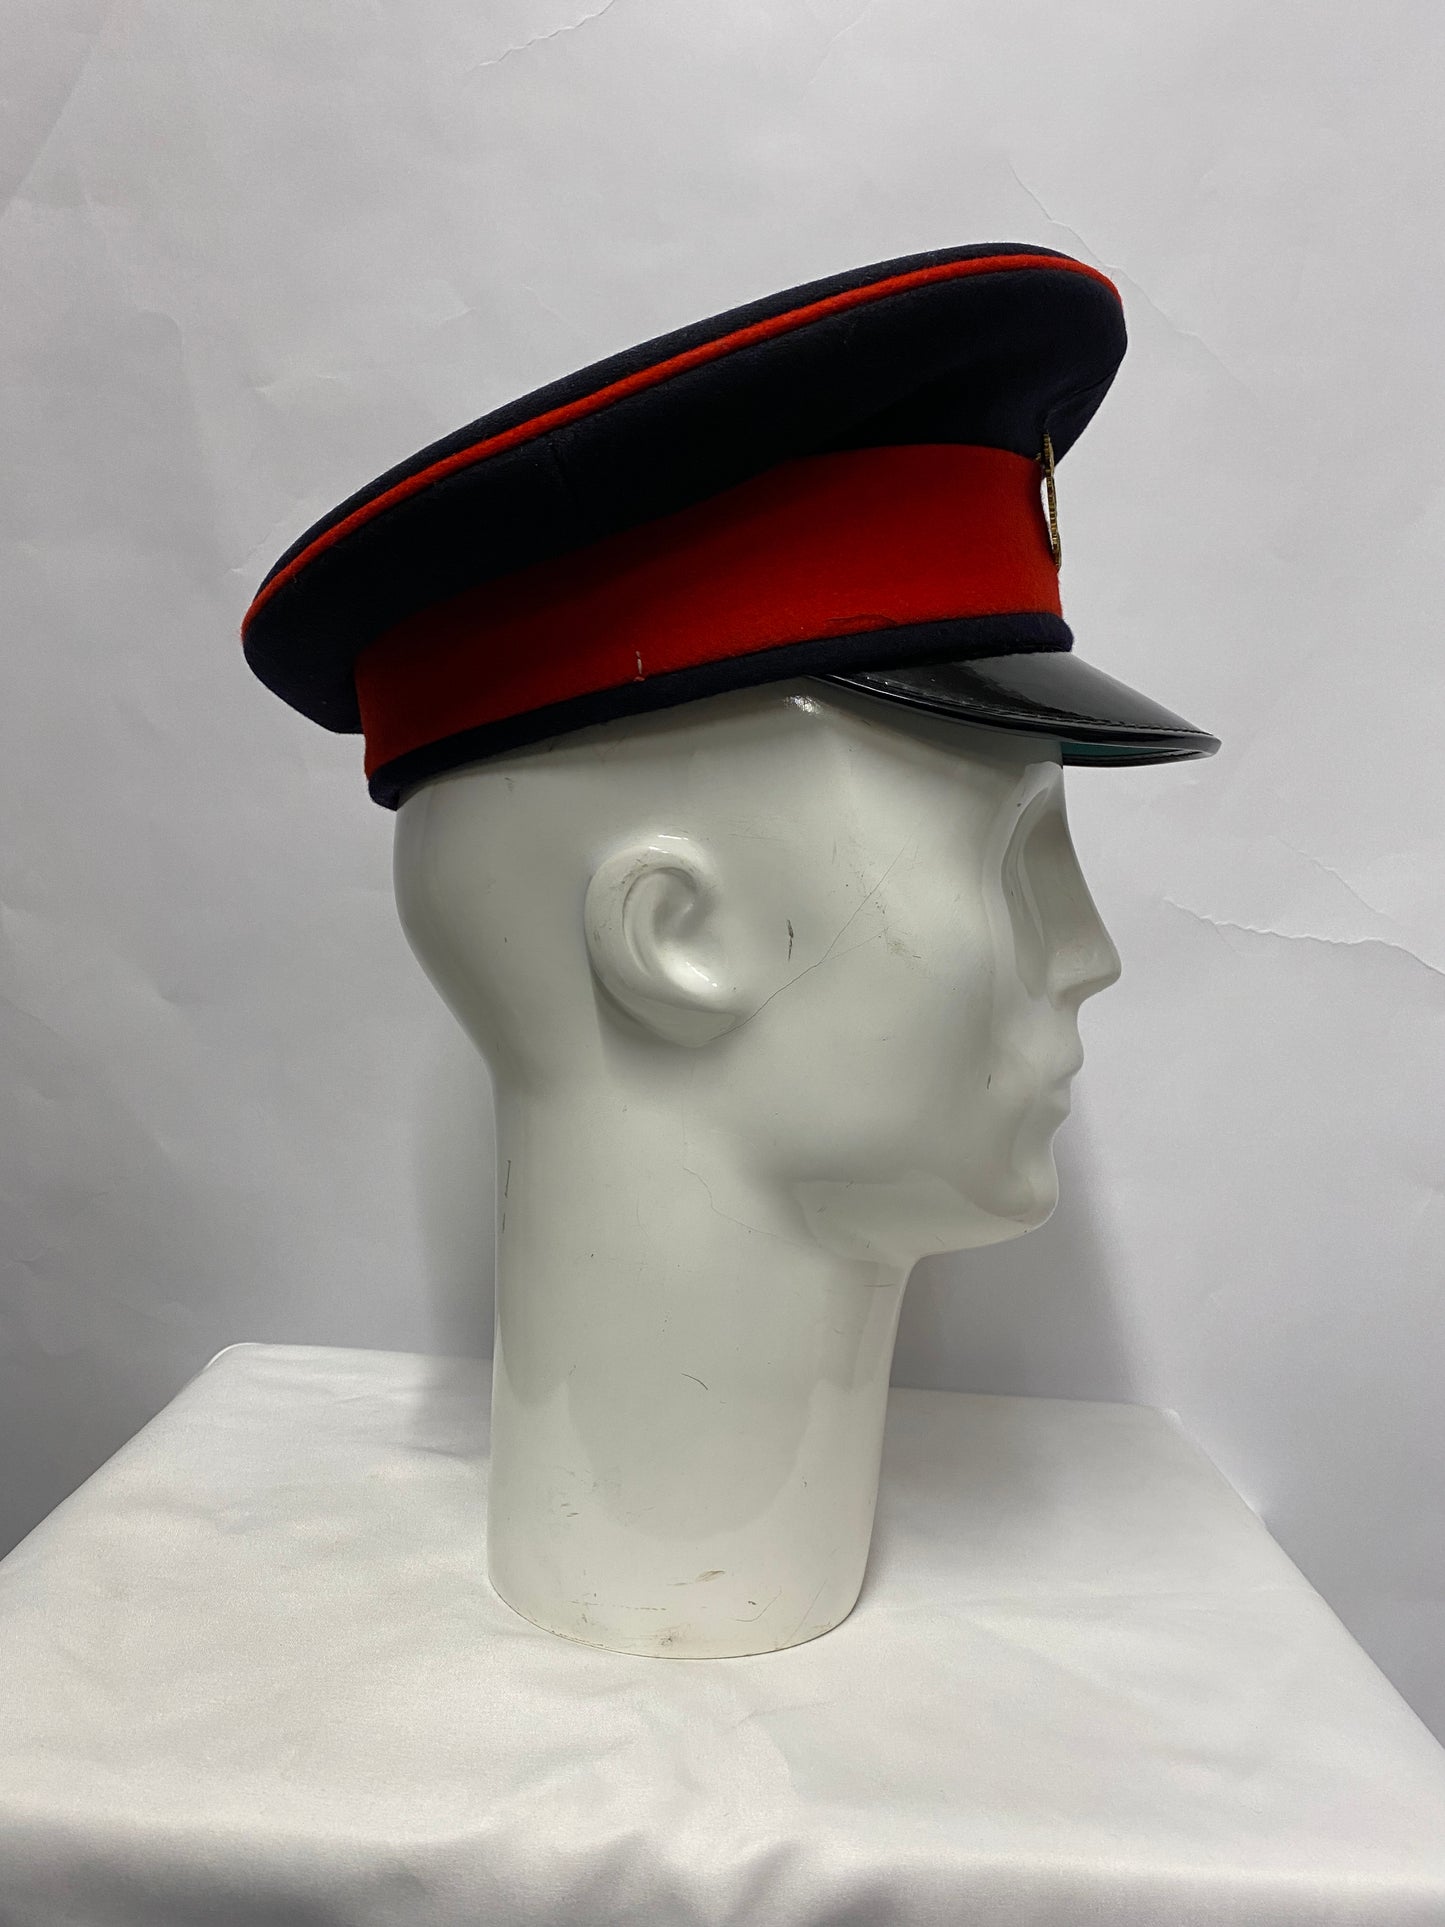 British Corps Of Army Music Navy and Red Dress Uniform Hat 57